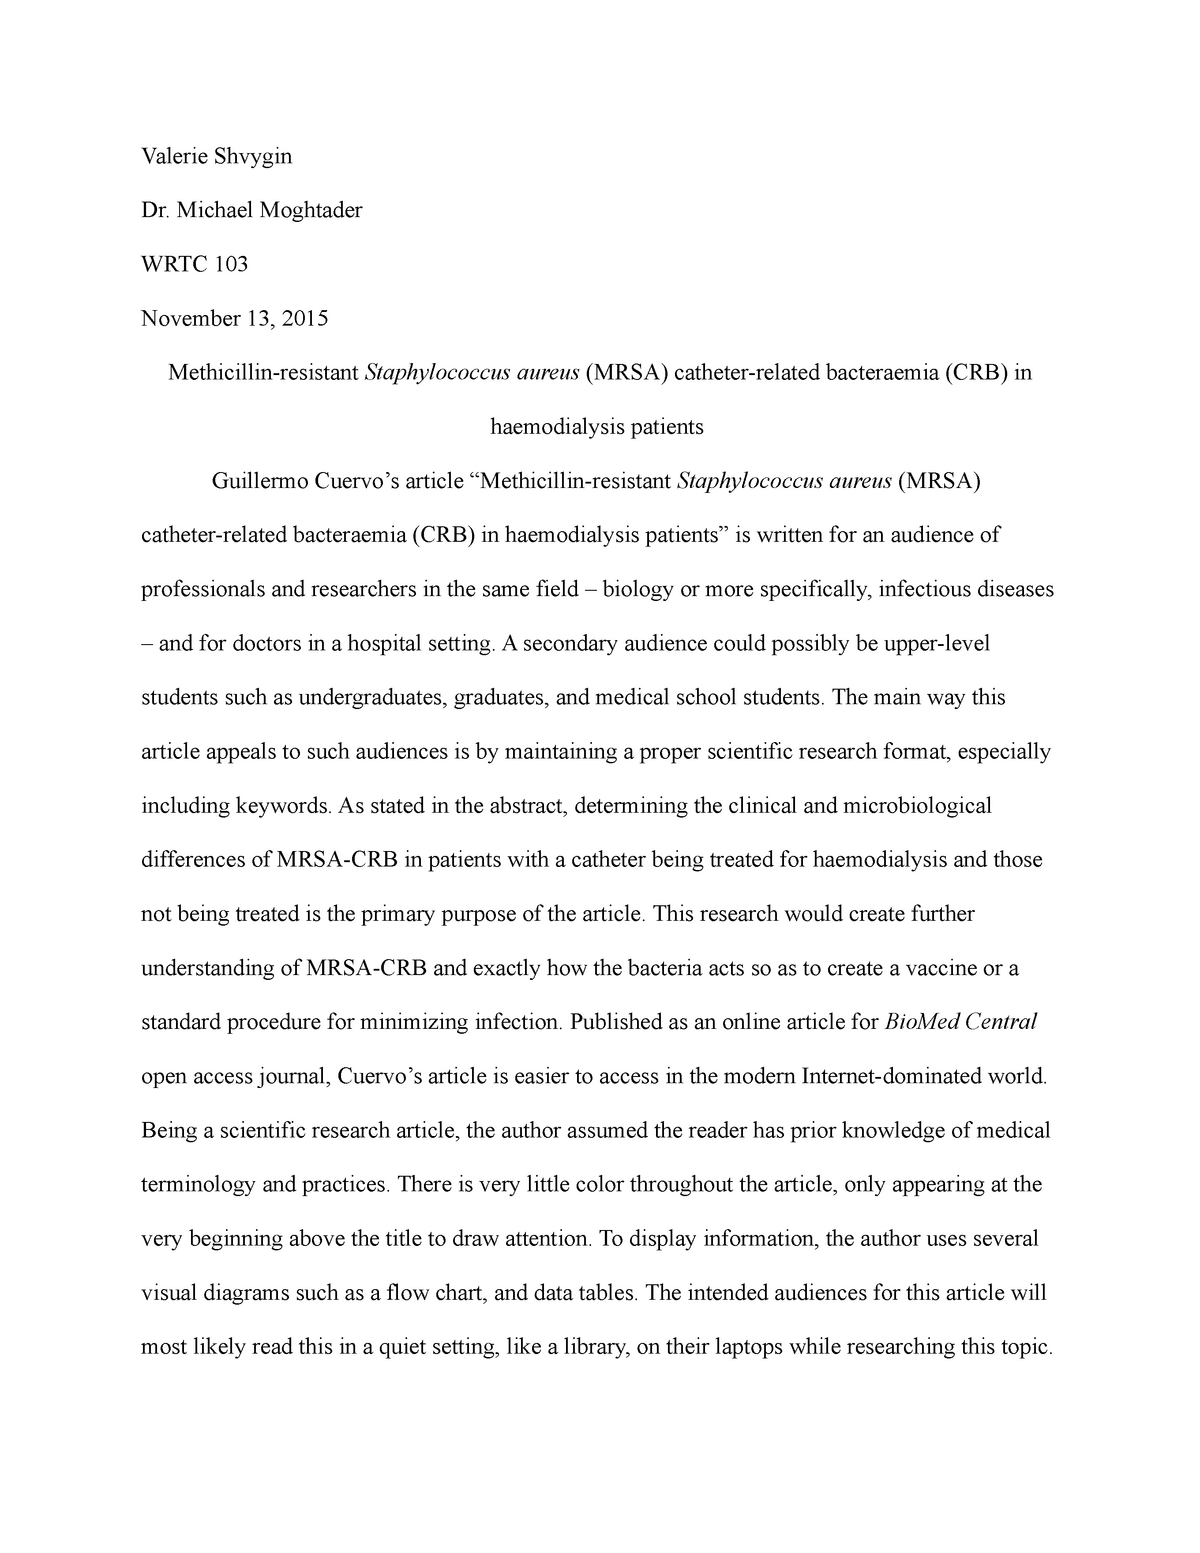 critical reading and writing essay